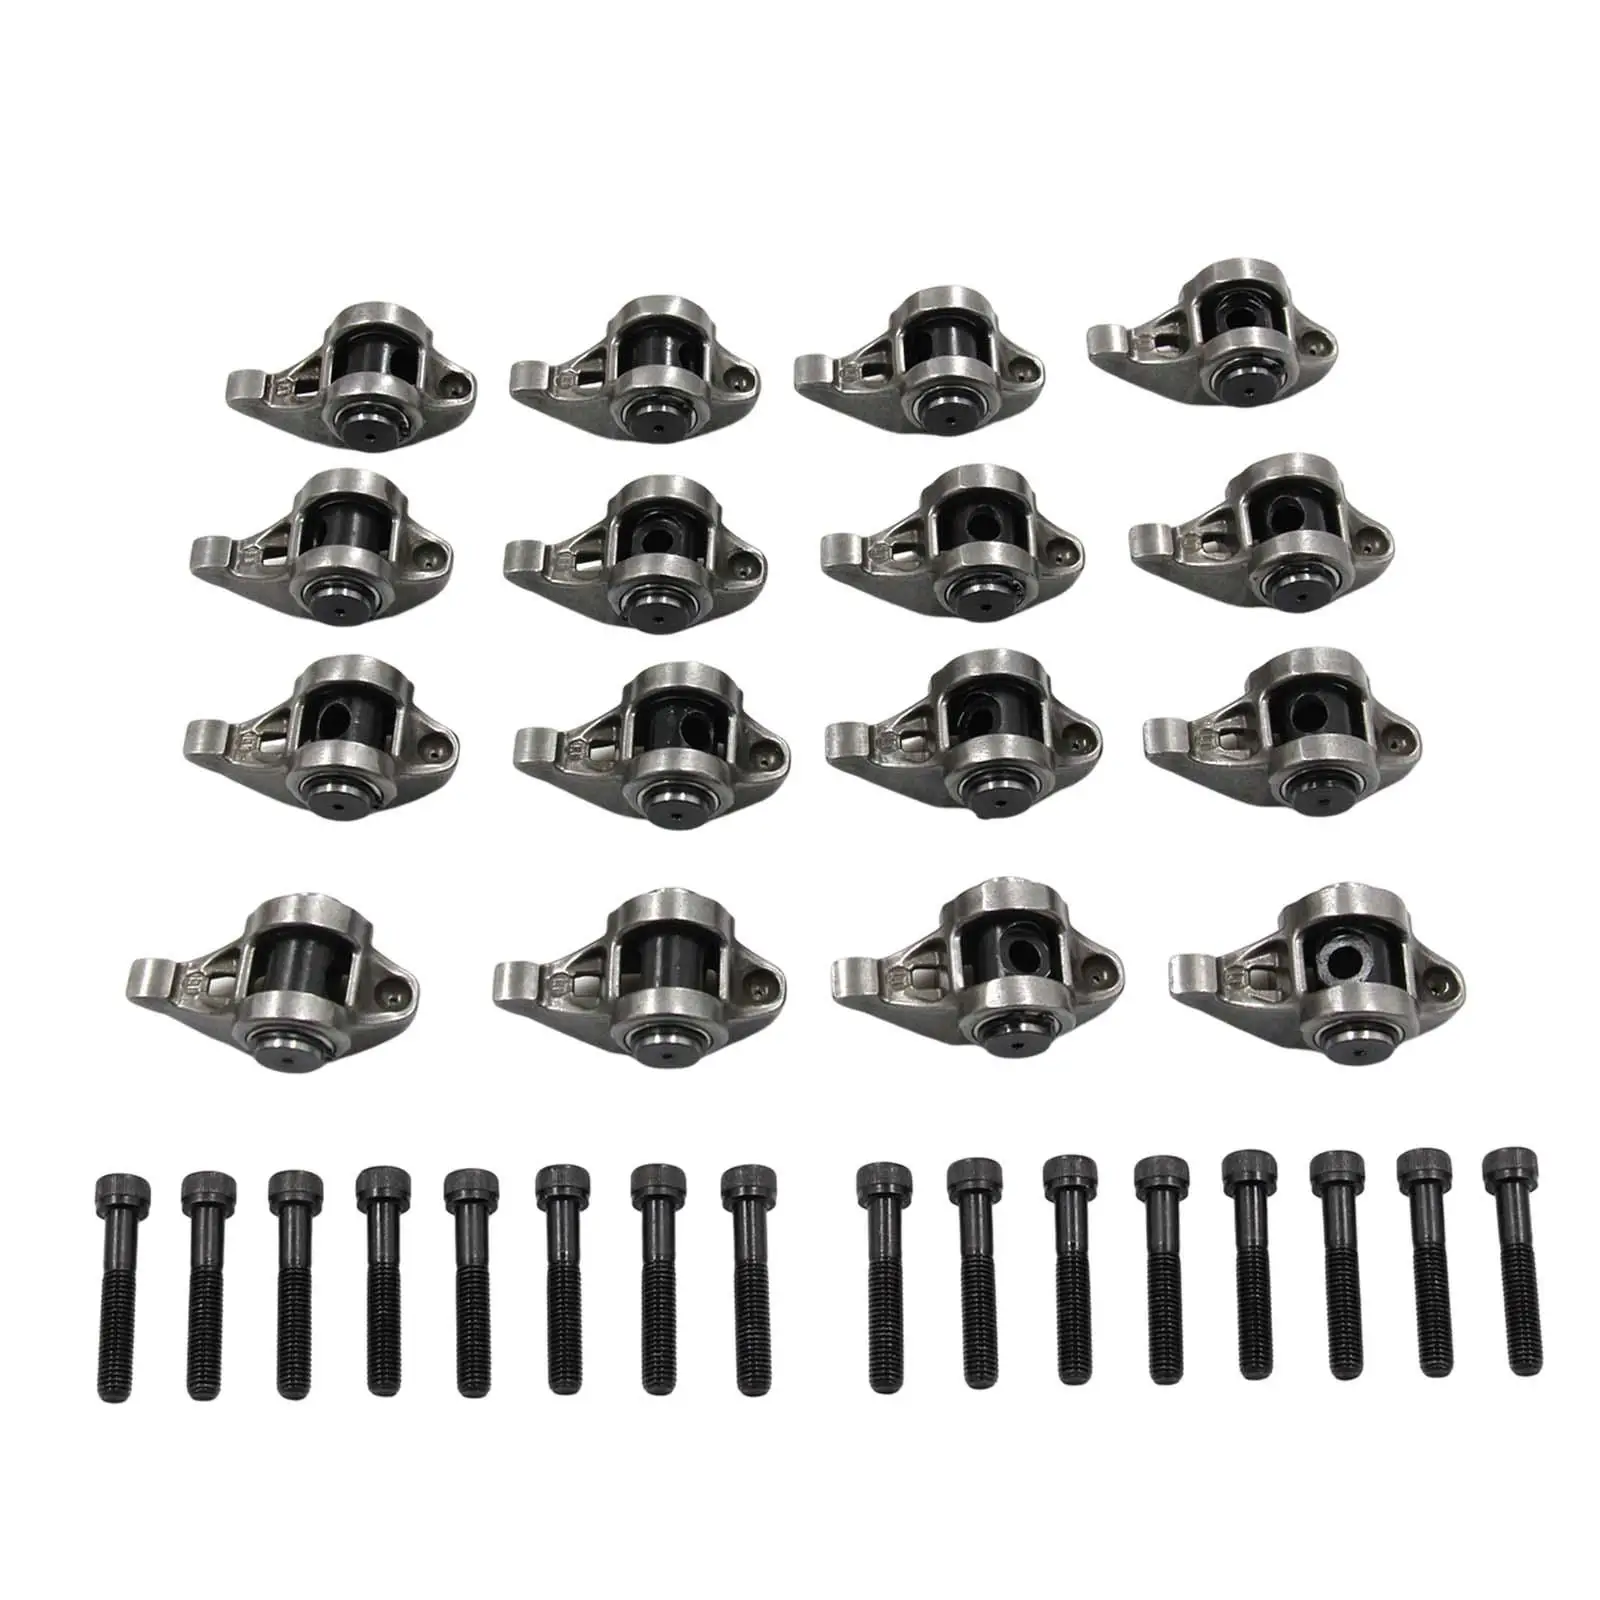 16 Pieces Rocker Arms and Bolts Kit 10214664 for Chevrolet LS1 LS2 LS6 LM7 LM4 Lq4 Lq9 LY5 LY6 4.8 5.3 5.7 6.0L